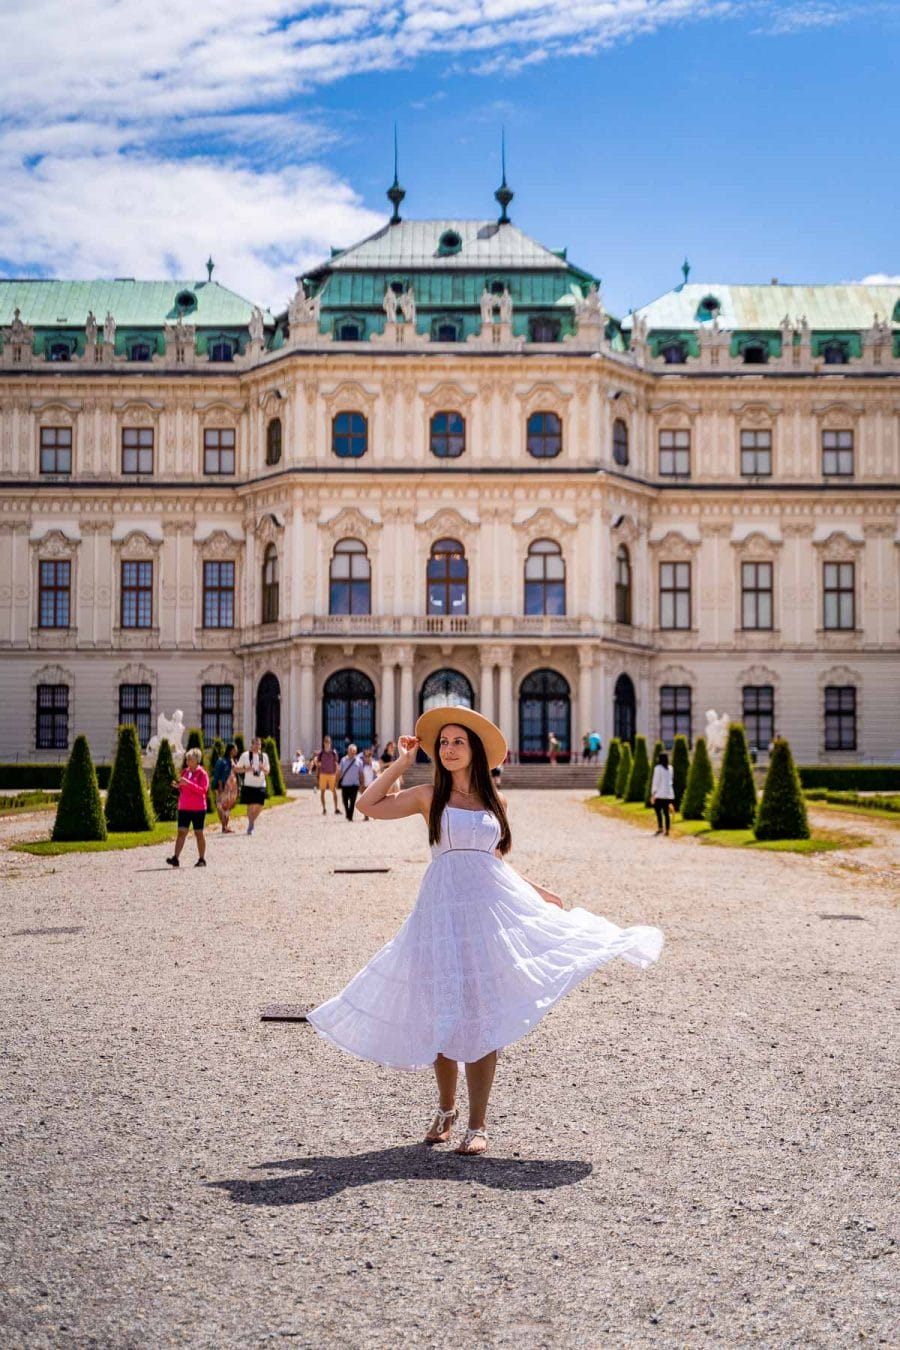 Girl in a white dress in front of Belvedere Palace in Vienna